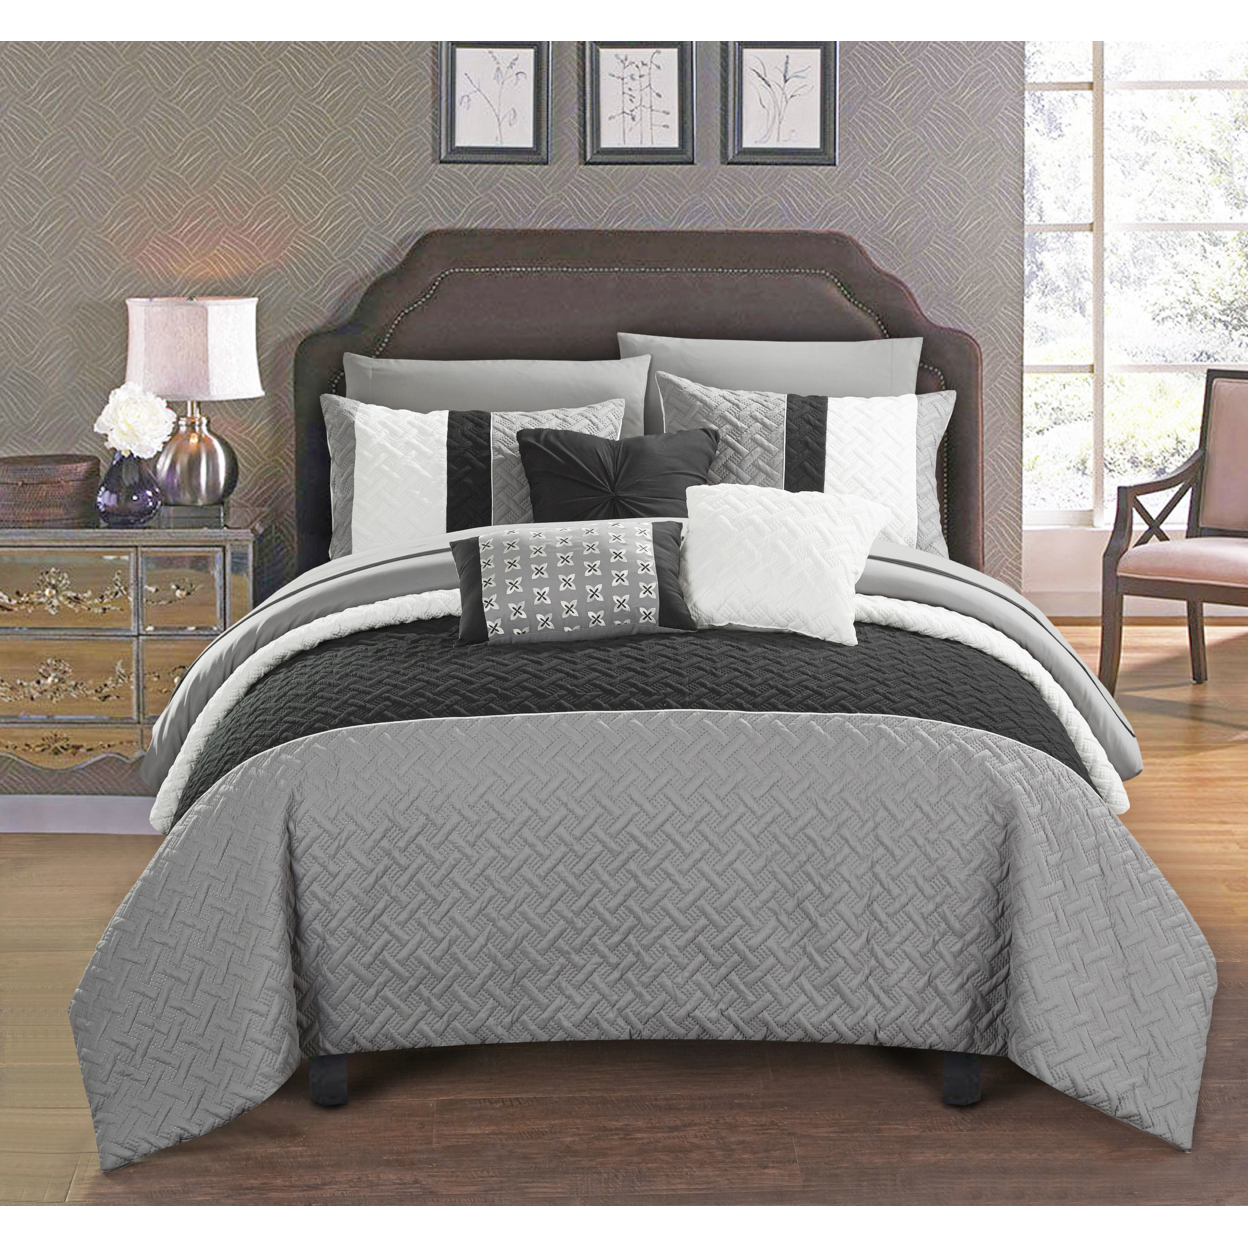 Chic Home Shaila 10 Or 8 Piece Comforter Set Color Block Quilted Embroidered Design Bed In A Bag Bedding - Grey, Twin